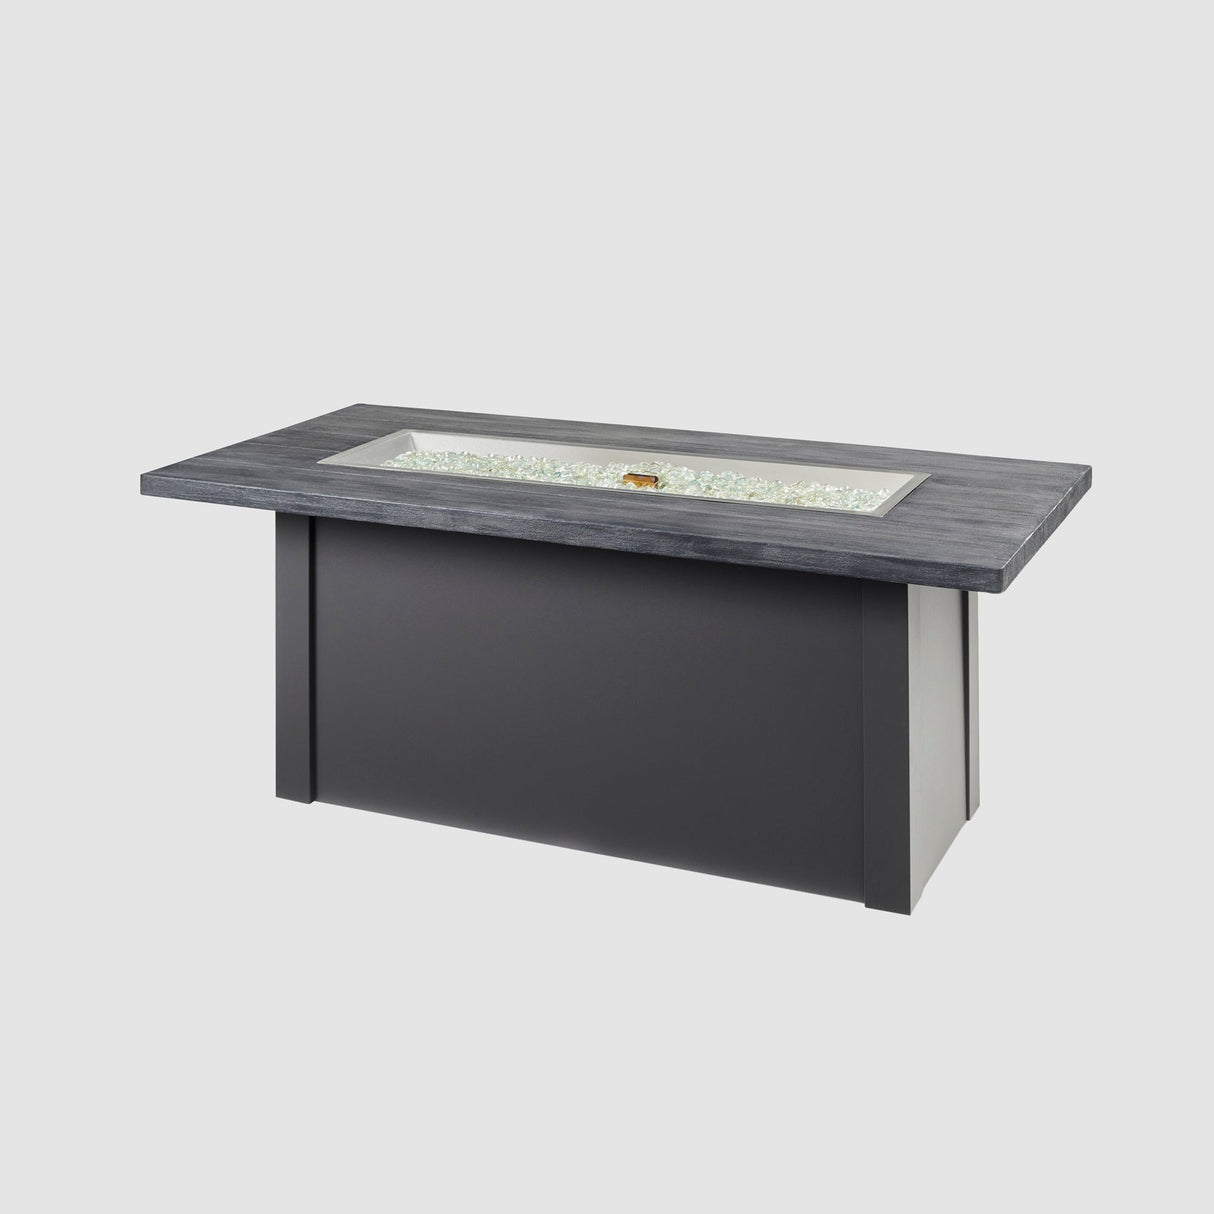 Fire gems placed on the burner of a Havenwood Linear Gas Fire Pit Table with a Carbon Grey top and Graphite Grey base